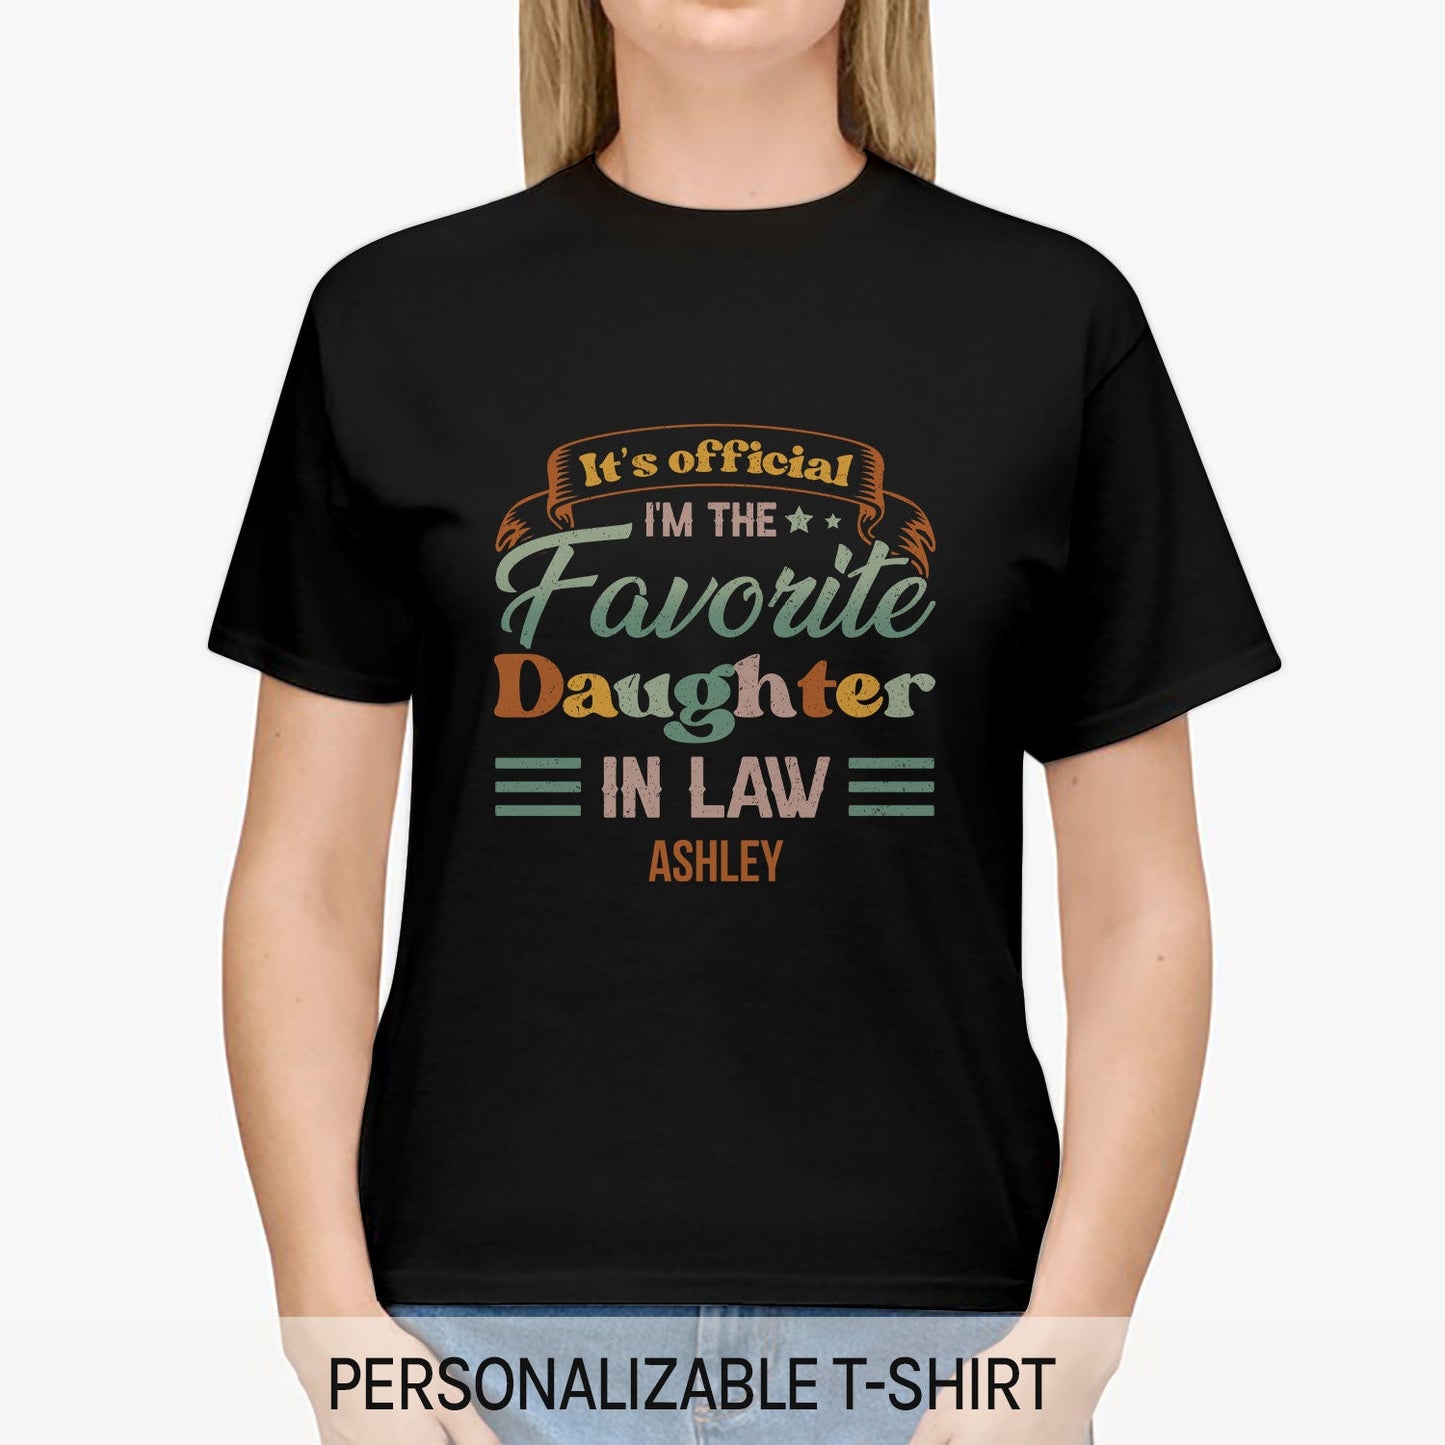 It's Official I'm The Favorite Daughter-in-law - Personalized Christmas gift For Daughter In Law - Custom Tshirt - MyMindfulGifts